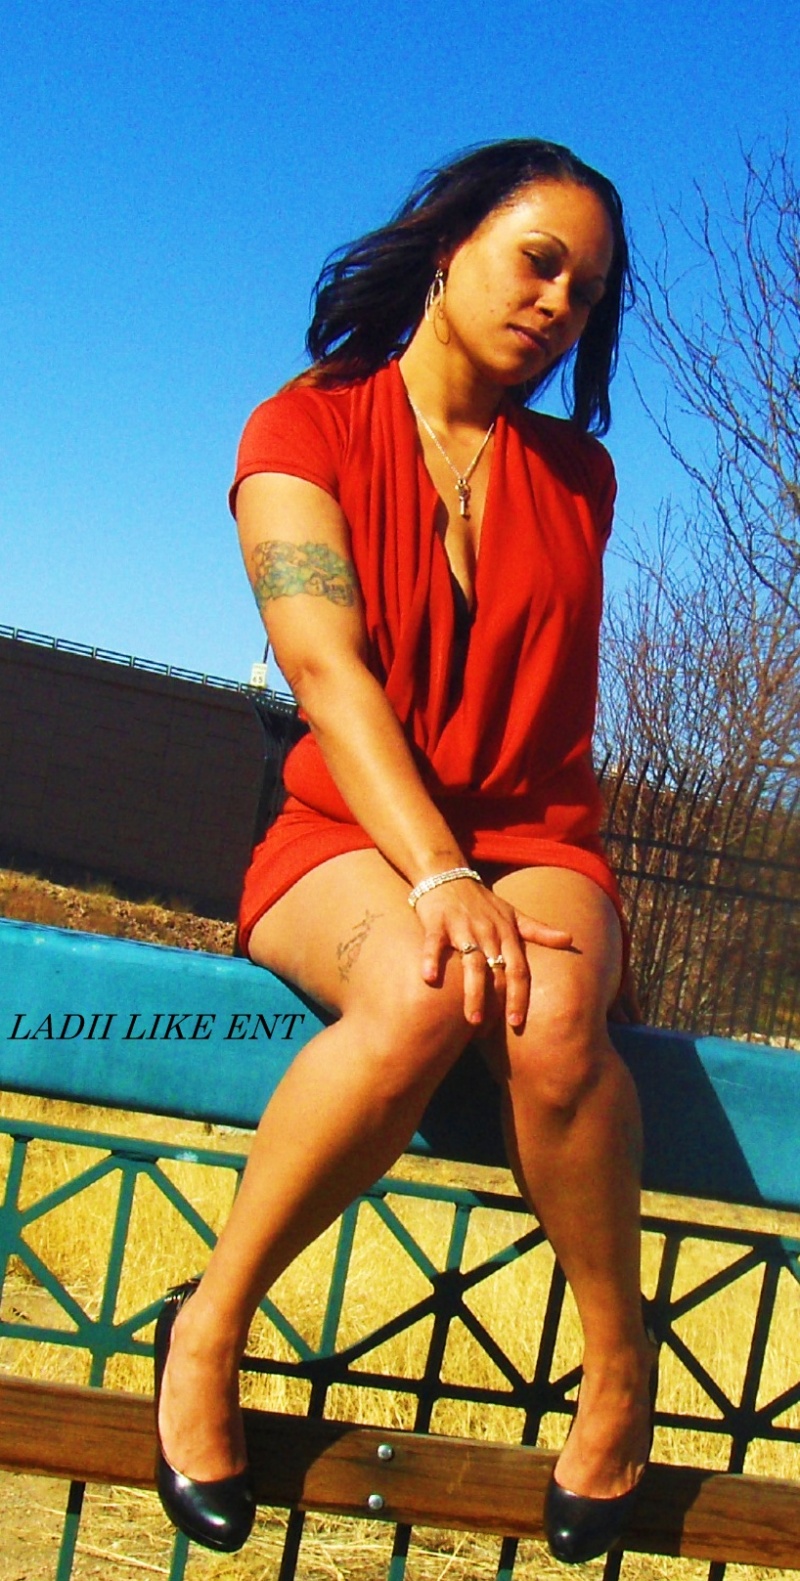 Female model photo shoot of Ladii Class in America the Beautiful park